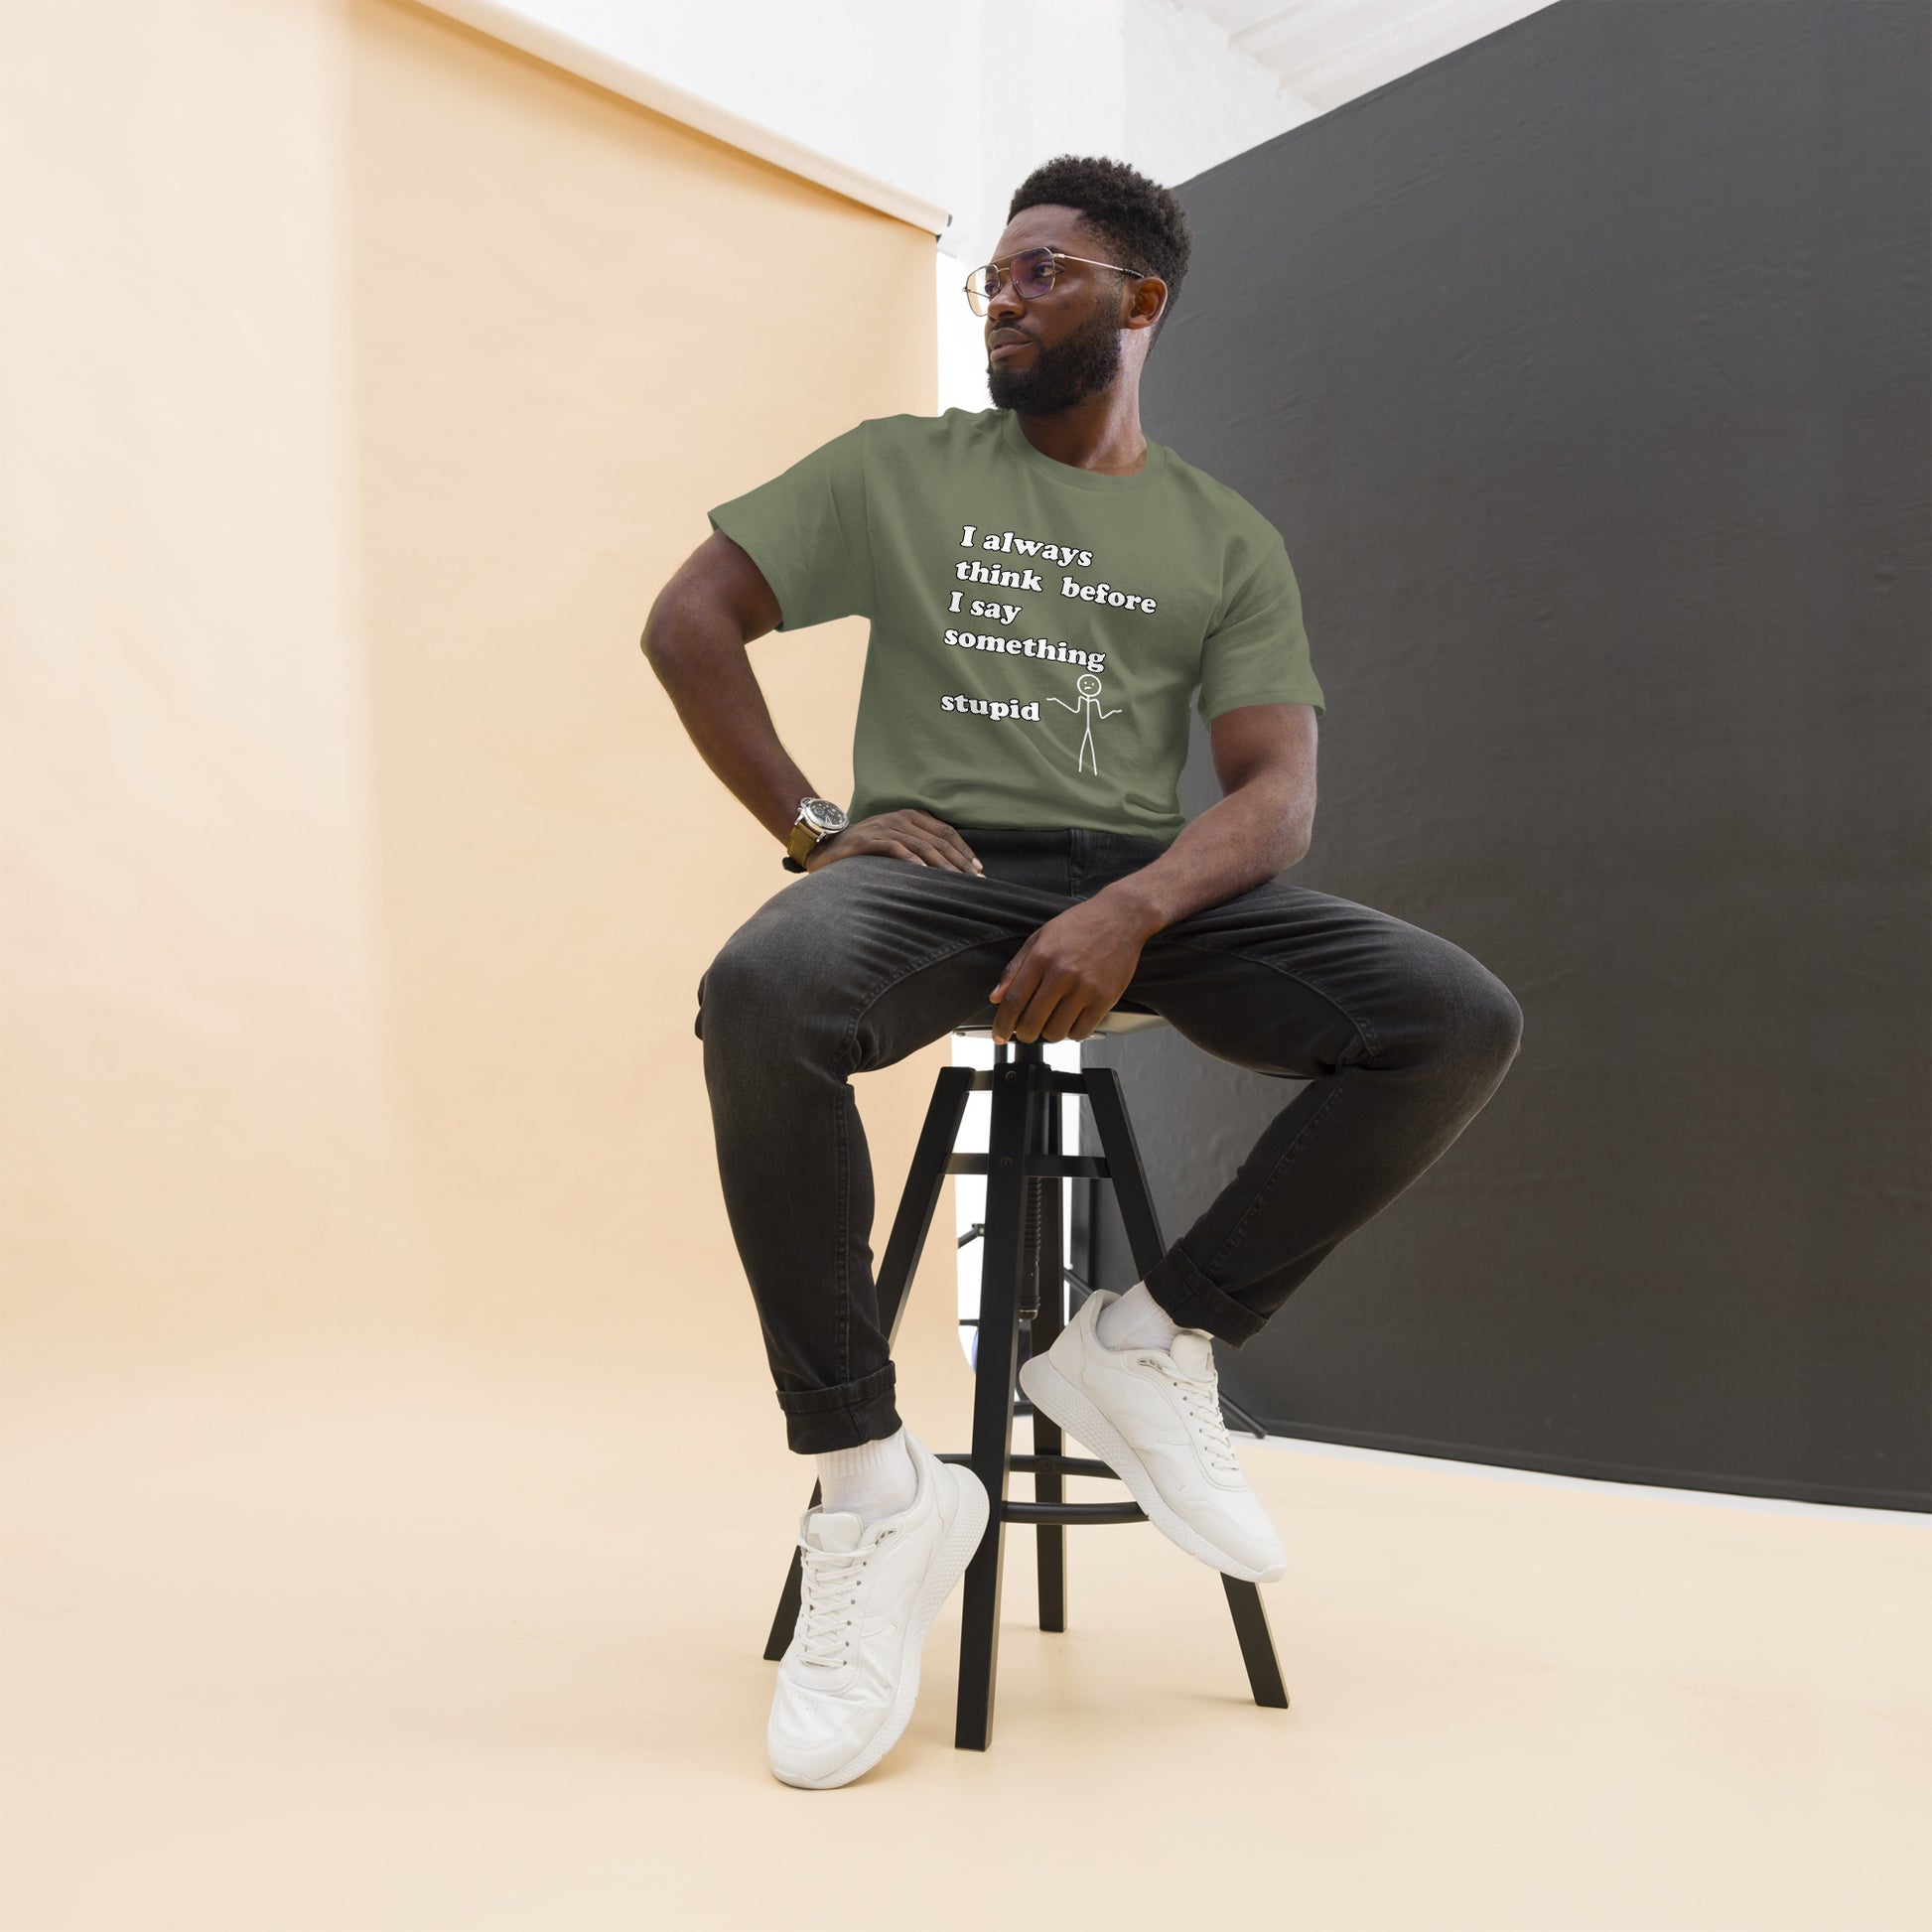 Man with military green t-shirt with text "I always think before I say something stupid"